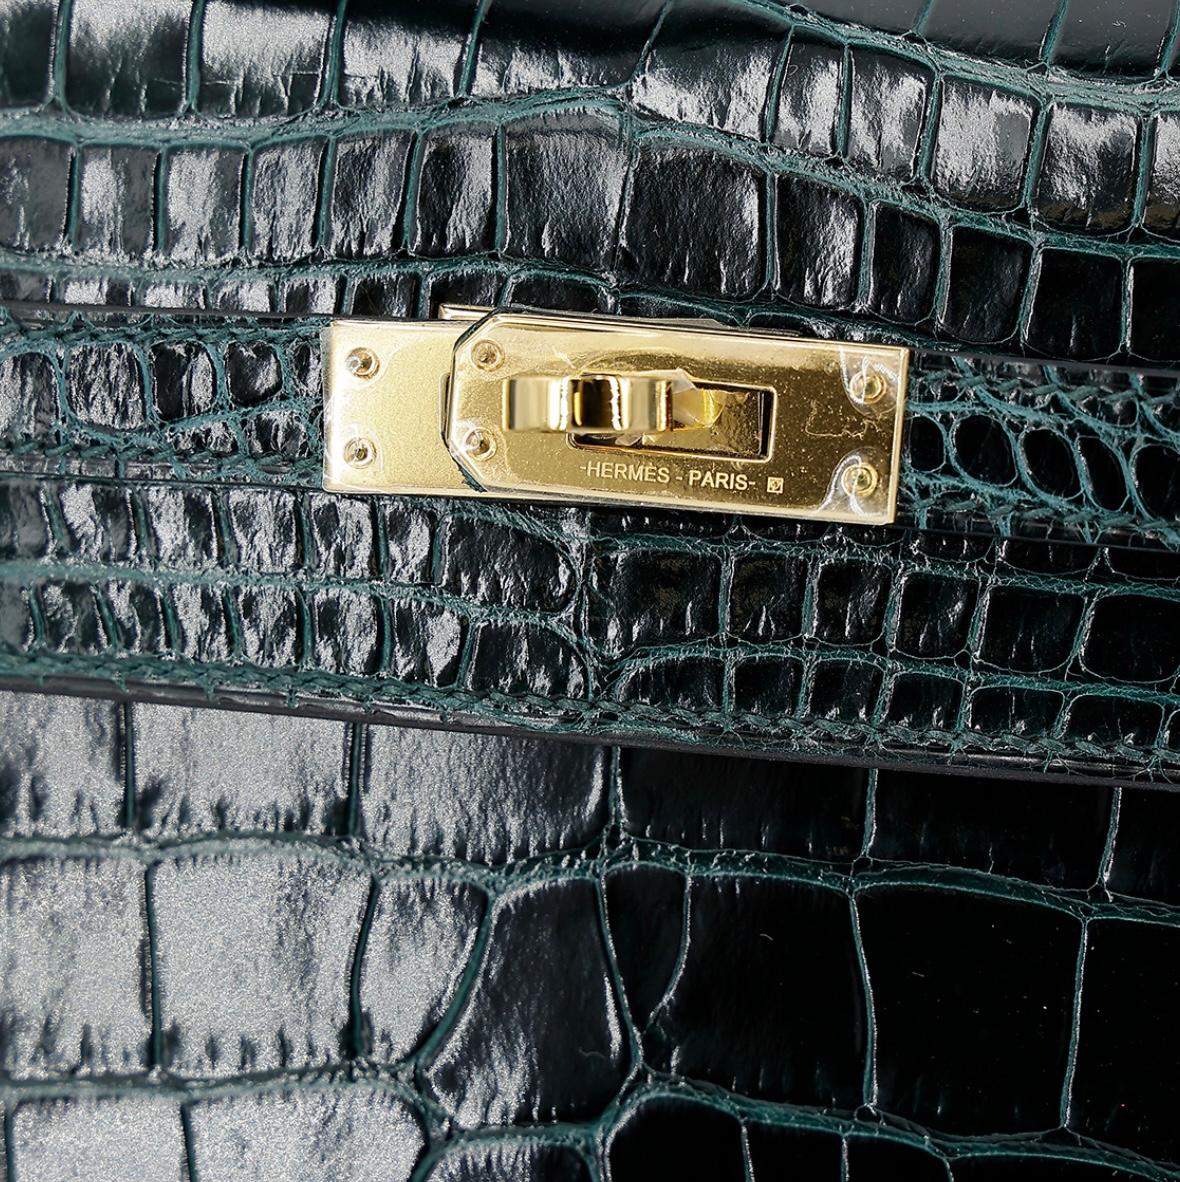 New Condition
From 2021 Collection
Vert Cypress
Alligator
Gold Tone Hardware
Leather Lining 
Measures 9.75